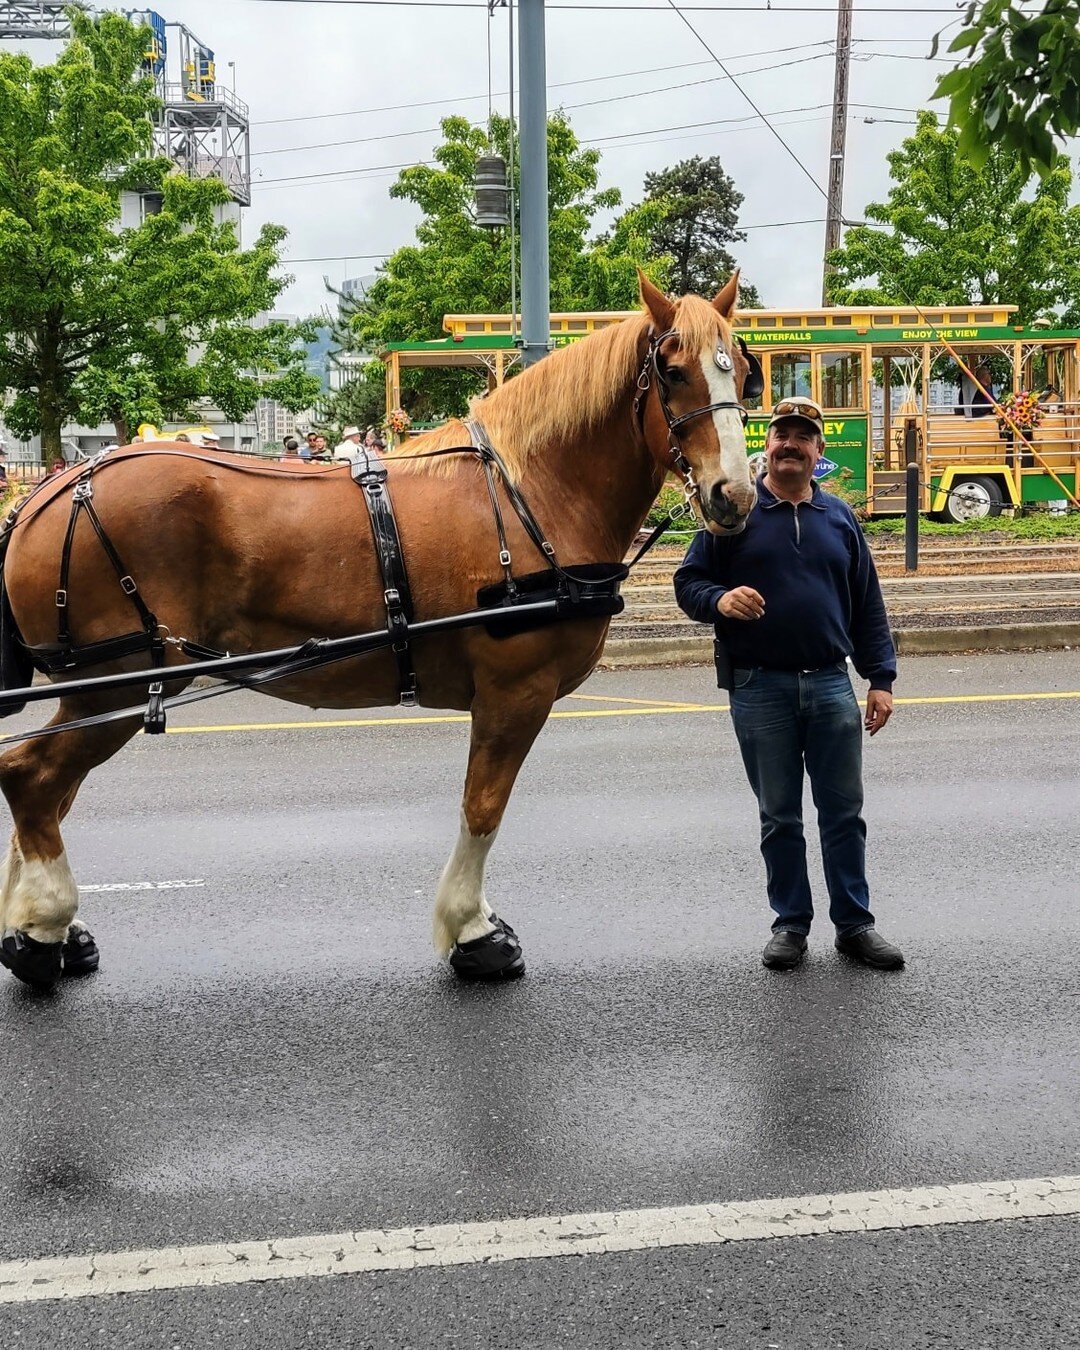 Happy father's day to the man who has been one of my greatest supporters!

#horseandcarriage #centraloregon #fathersday #bestdadever #belgianhorse #horsedrawncarriage